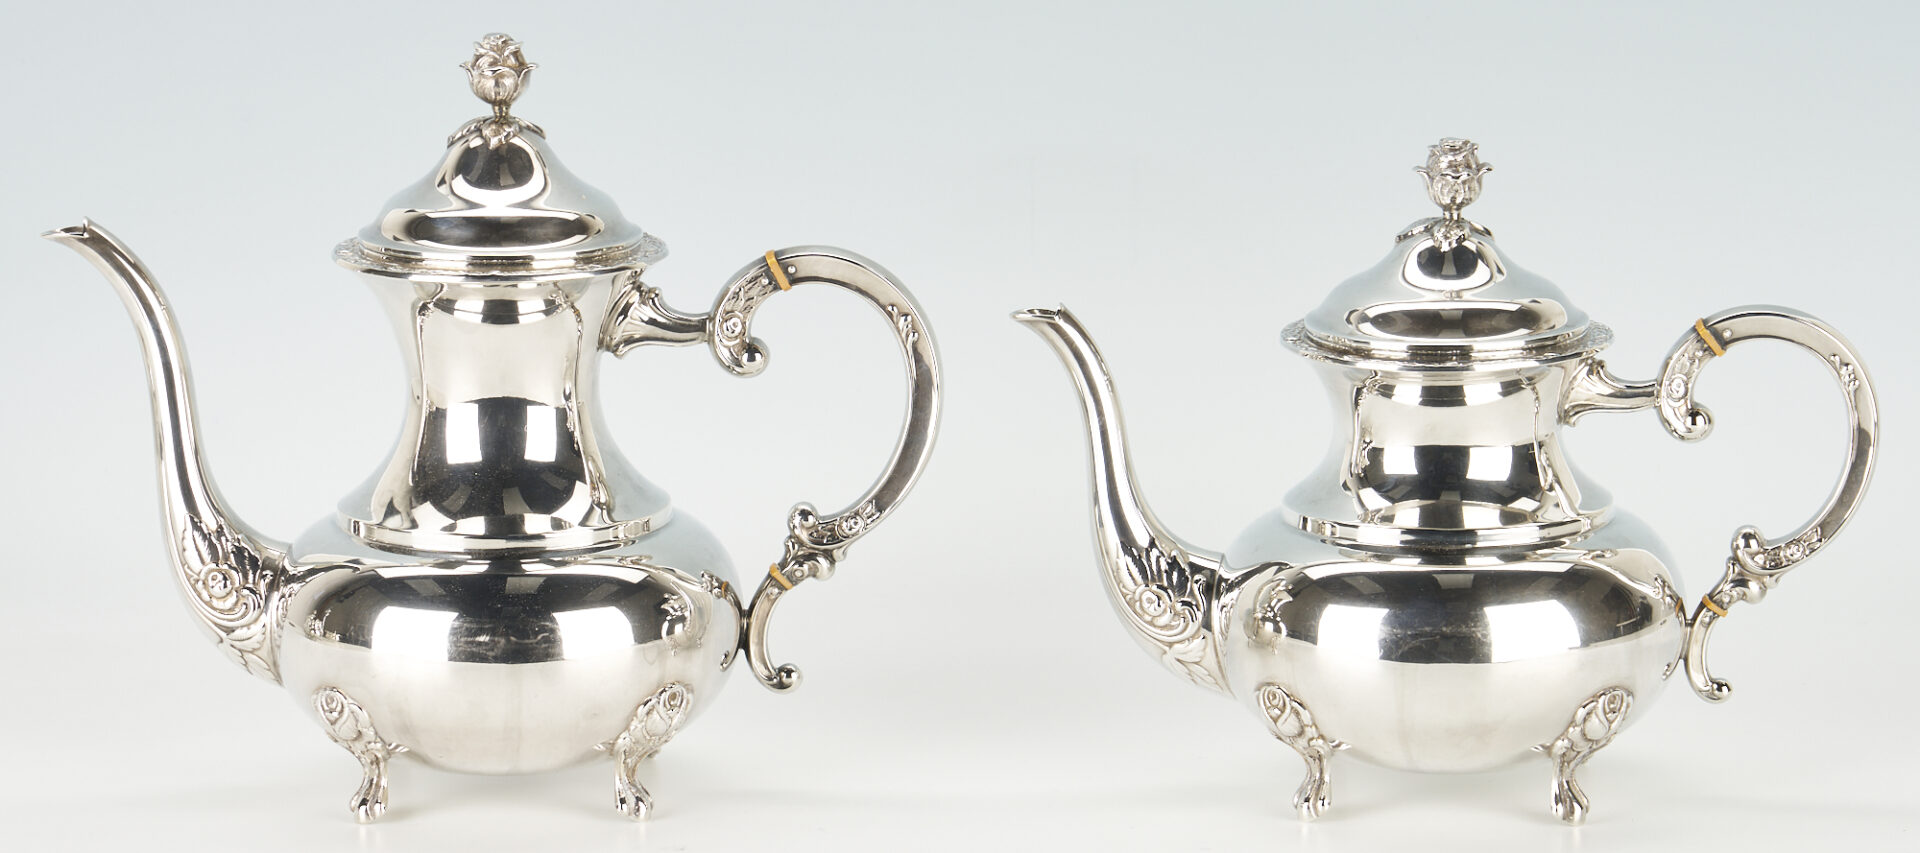 Lot 39: Eugen Ferner 5 pc Sterling Tea Set with Silverplated Tray